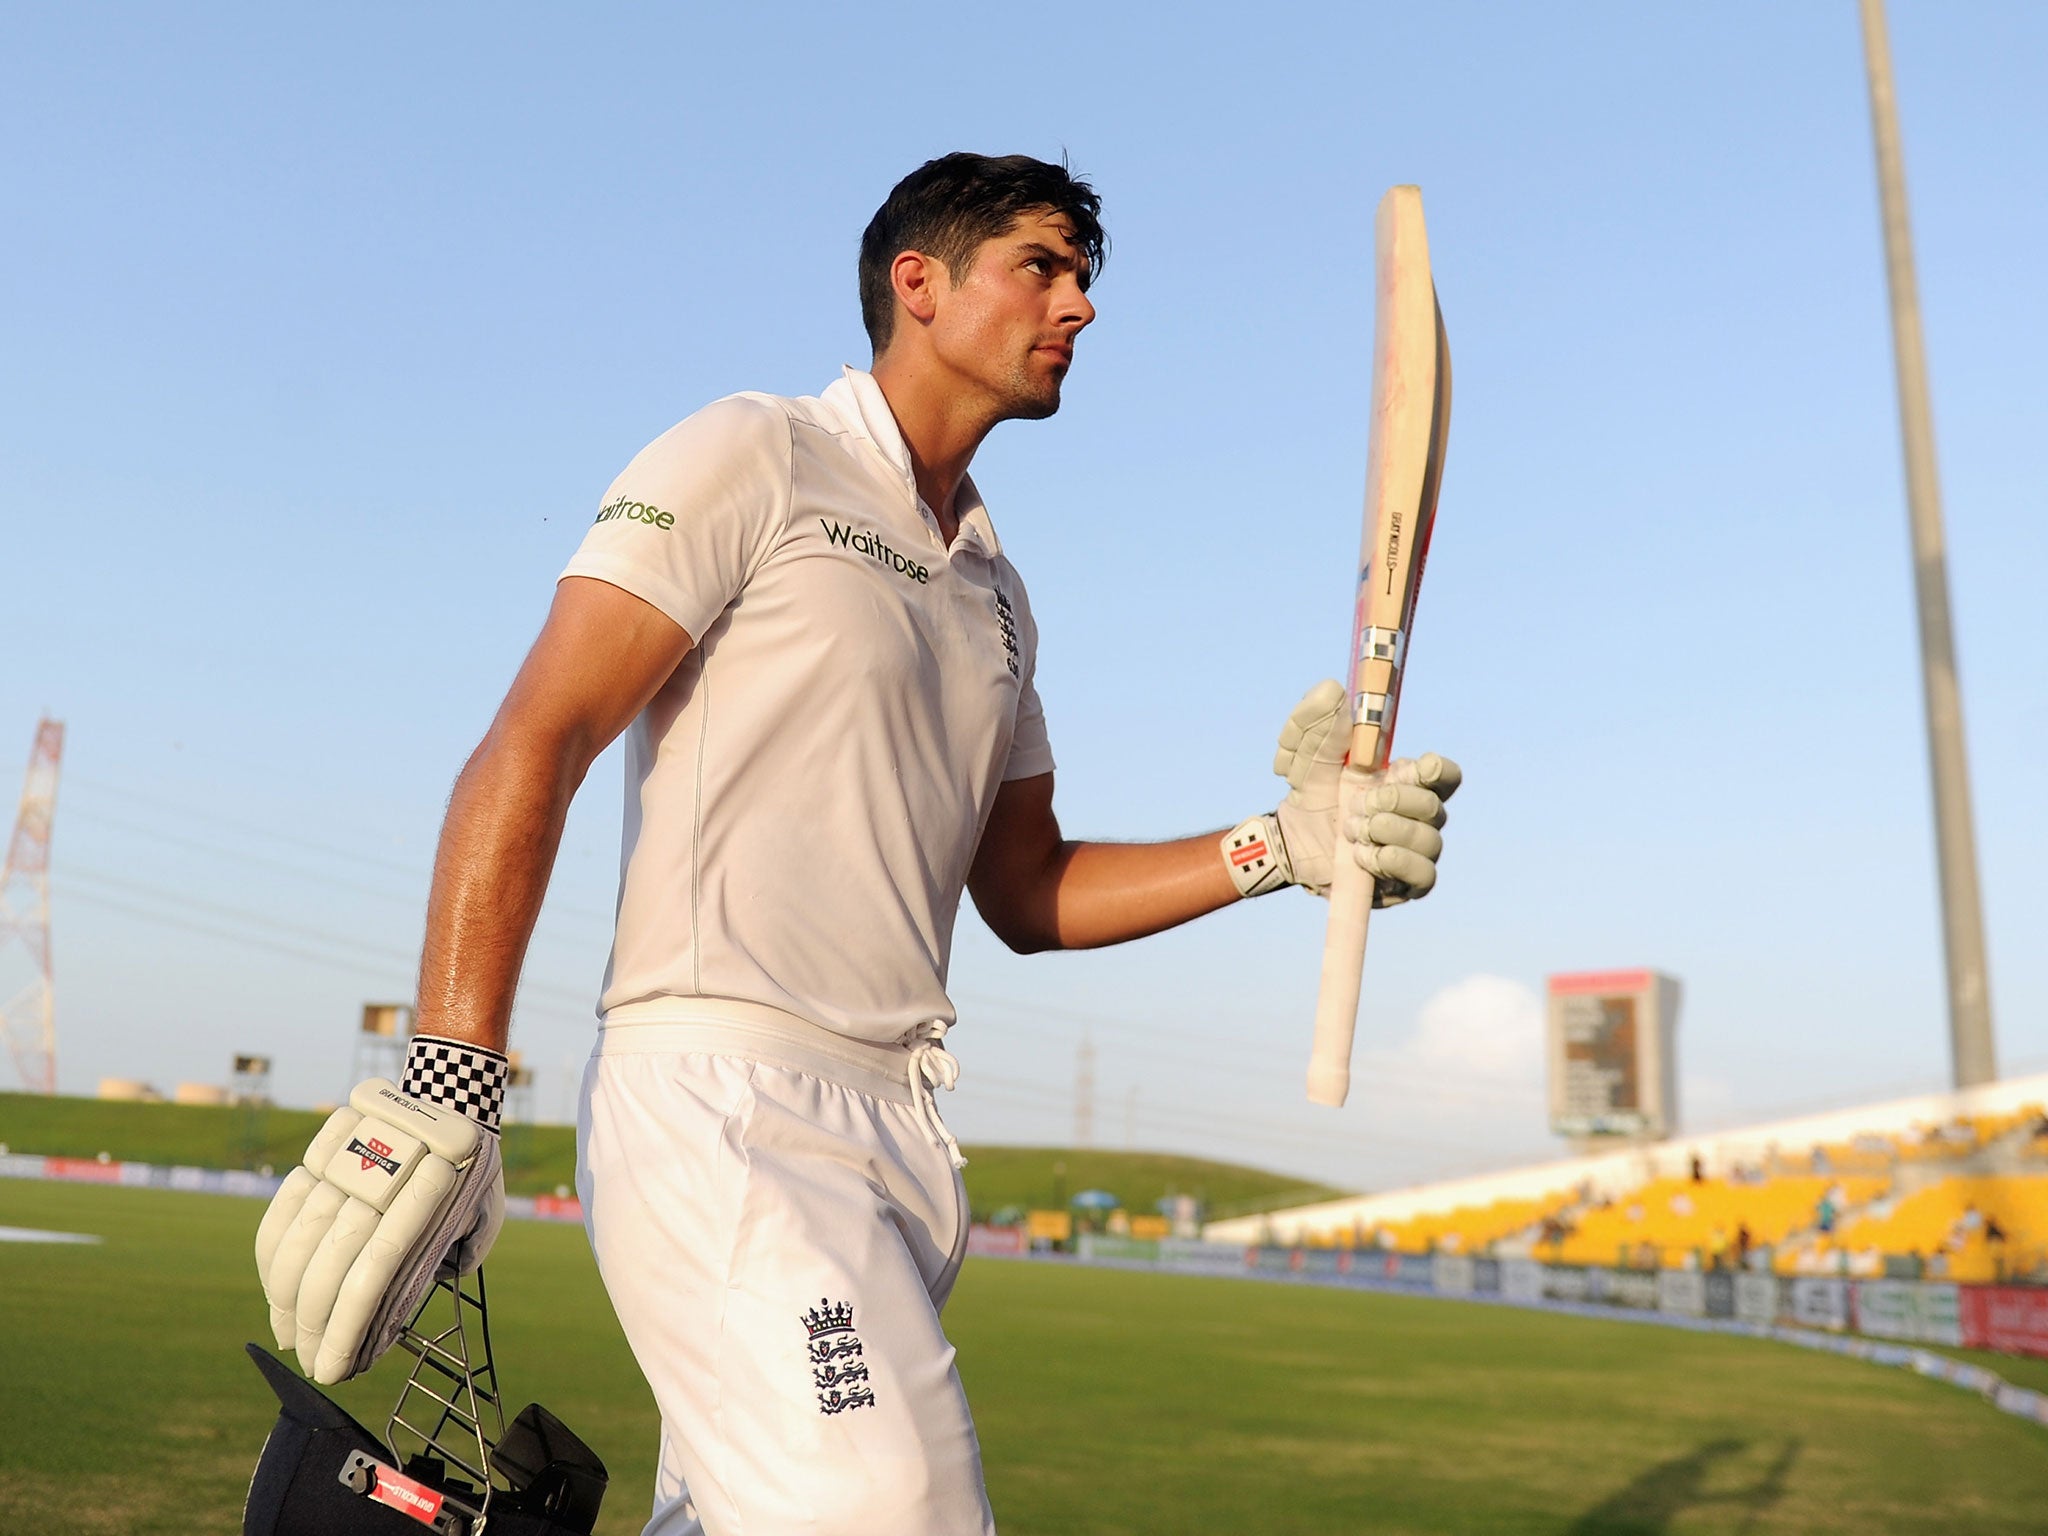 England captain Alastair Cook batted for 836 minutes, four short of 14 hours